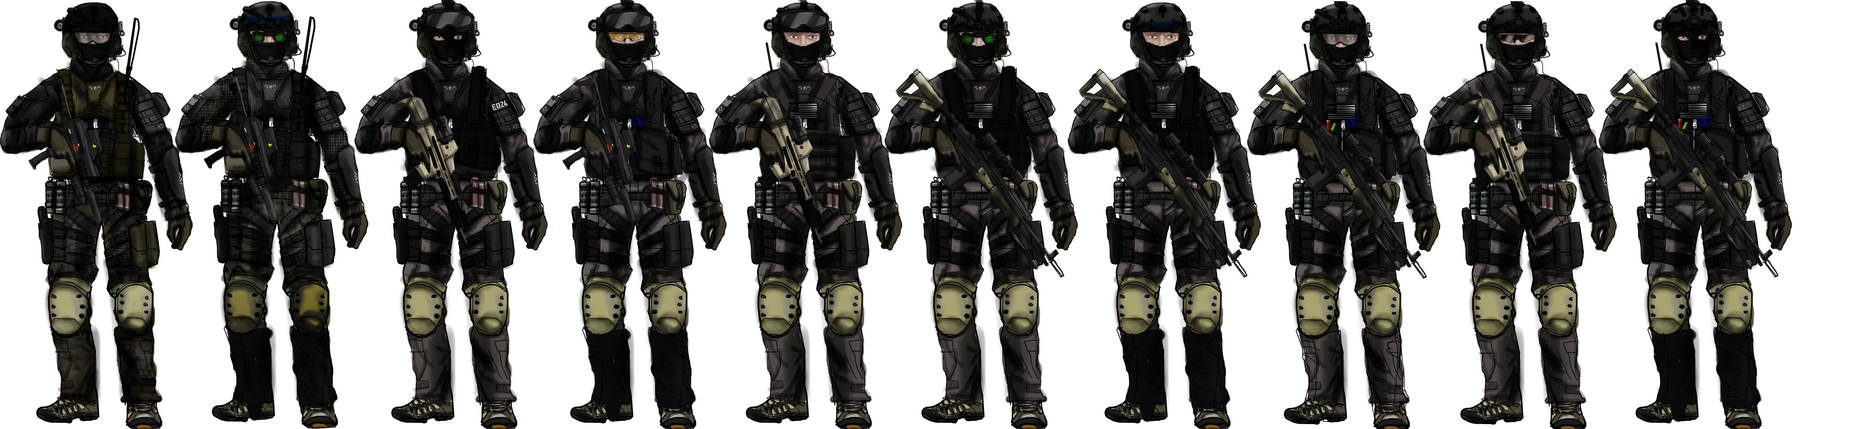 Black ops Soldiers concept